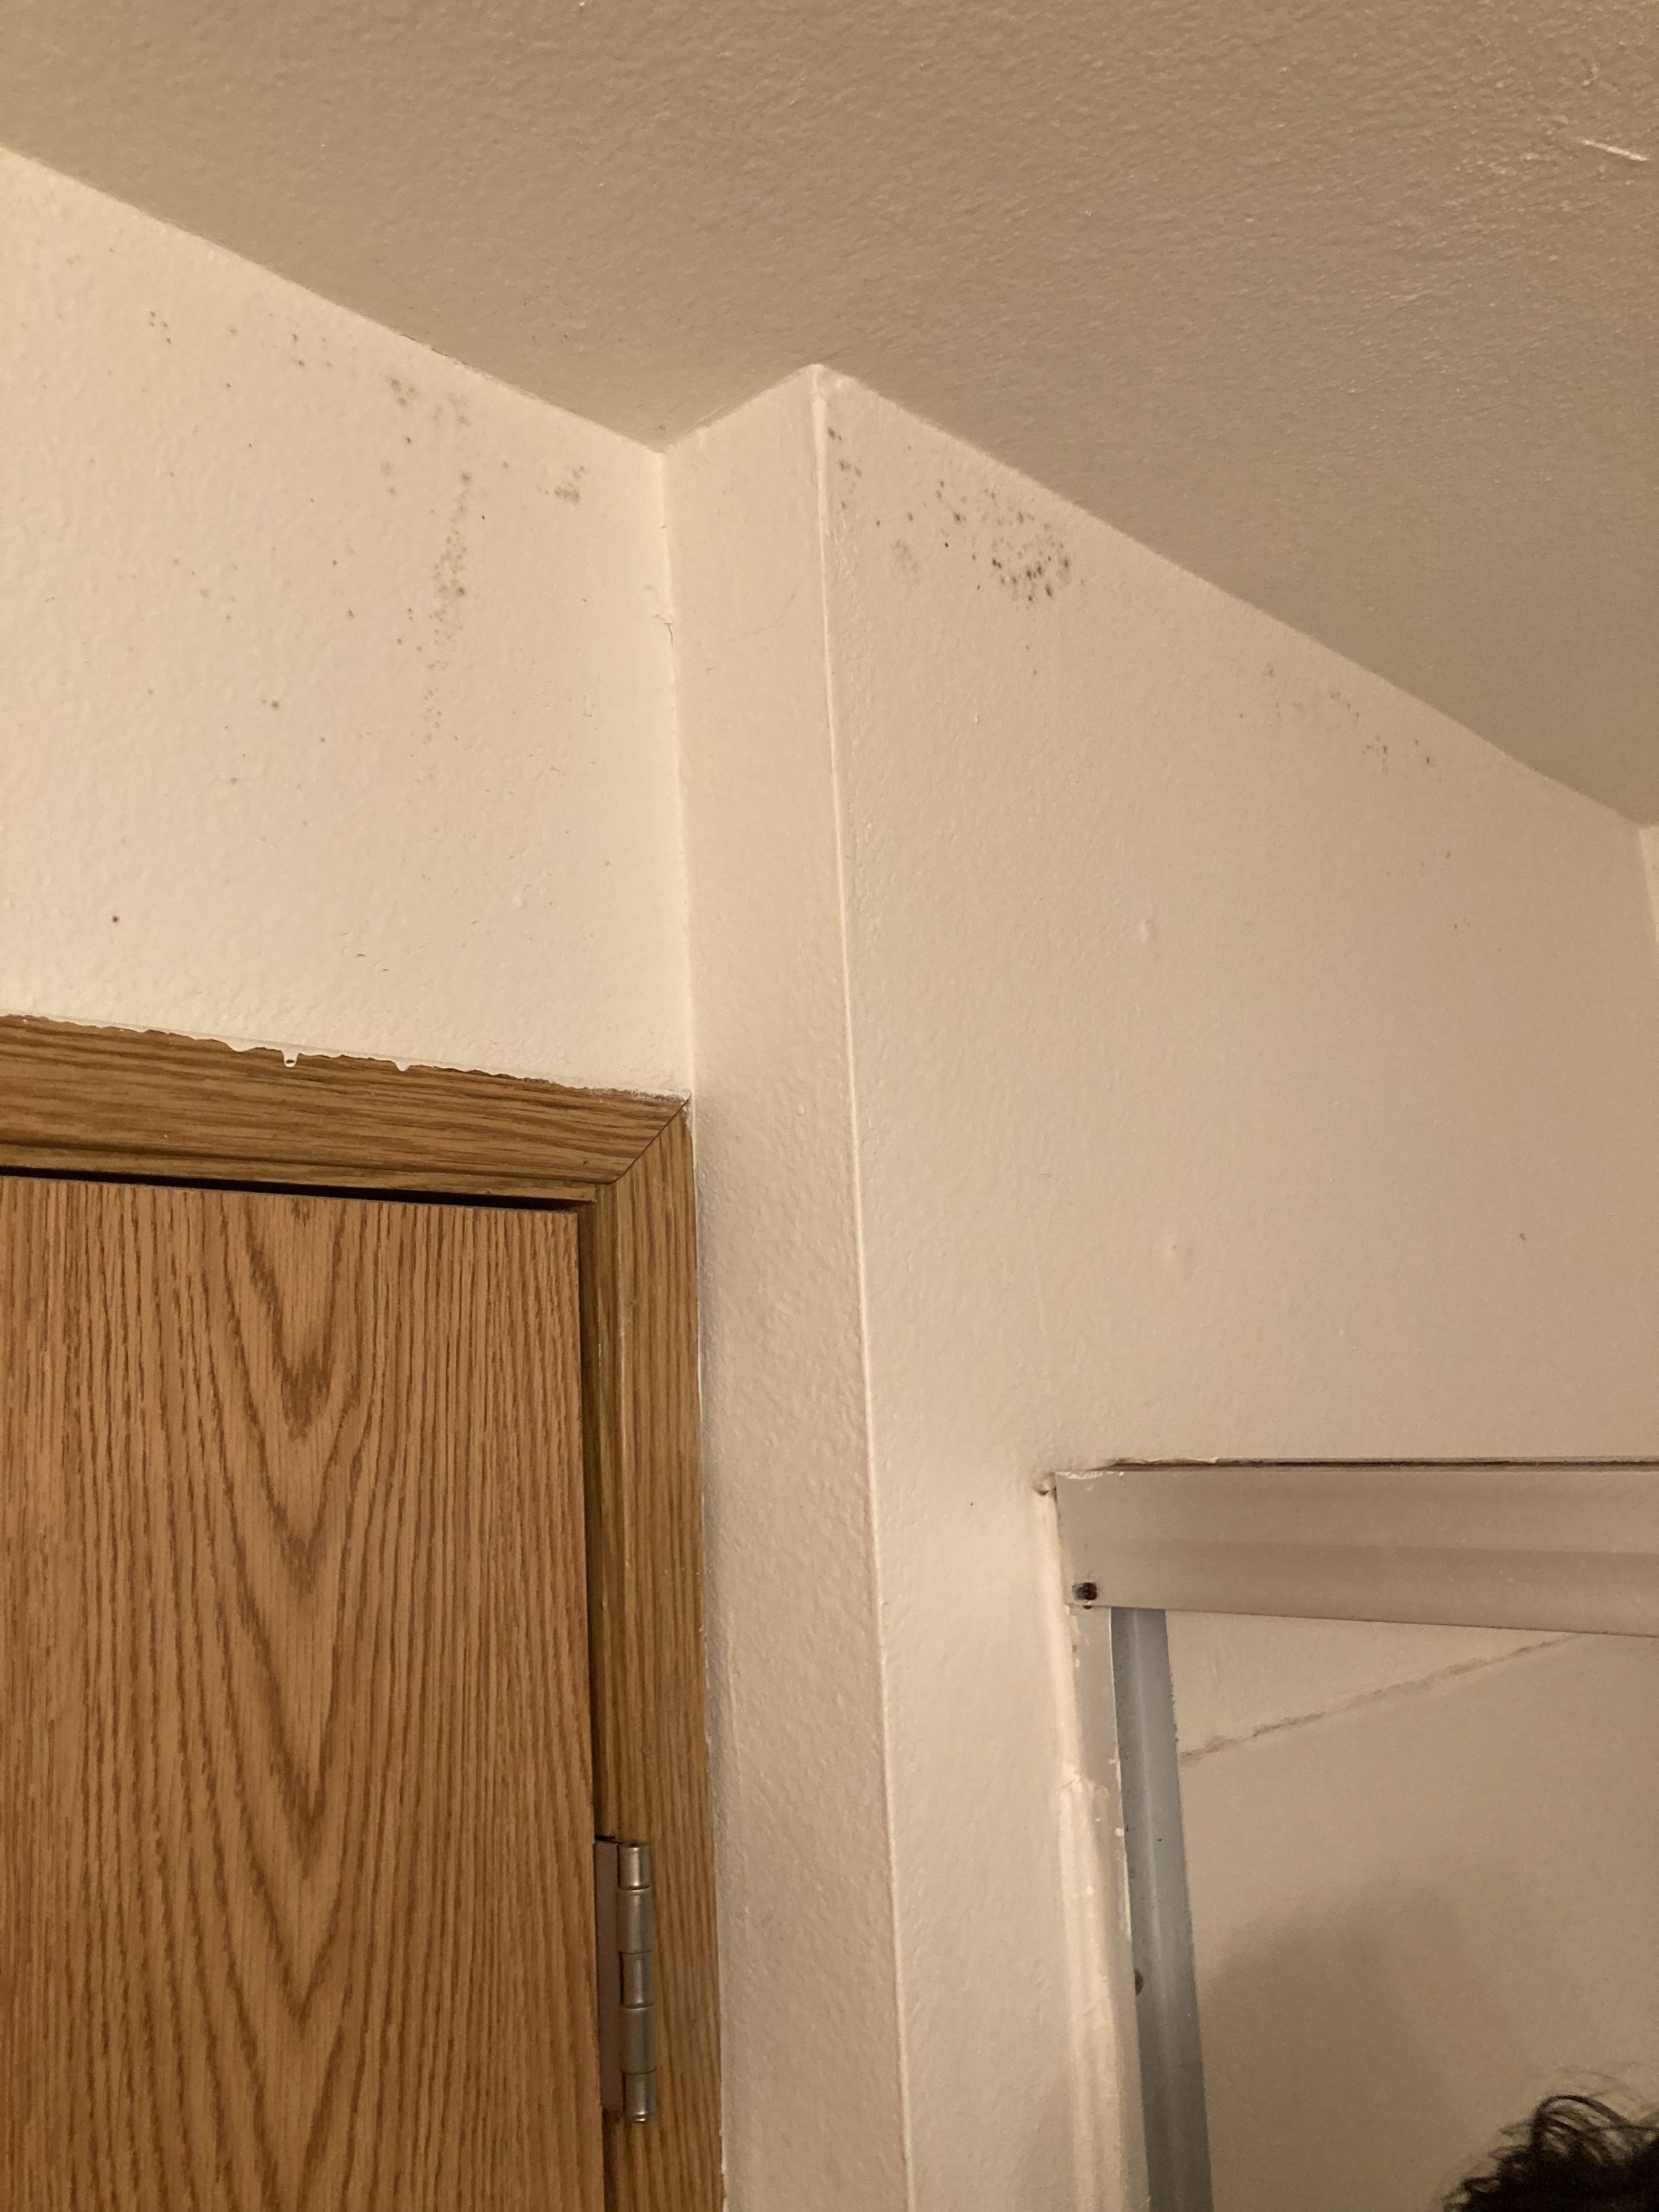 How To Know If You Have Mold In Walls How do I know if mold is behind my drywall? - 5 Microns Inc